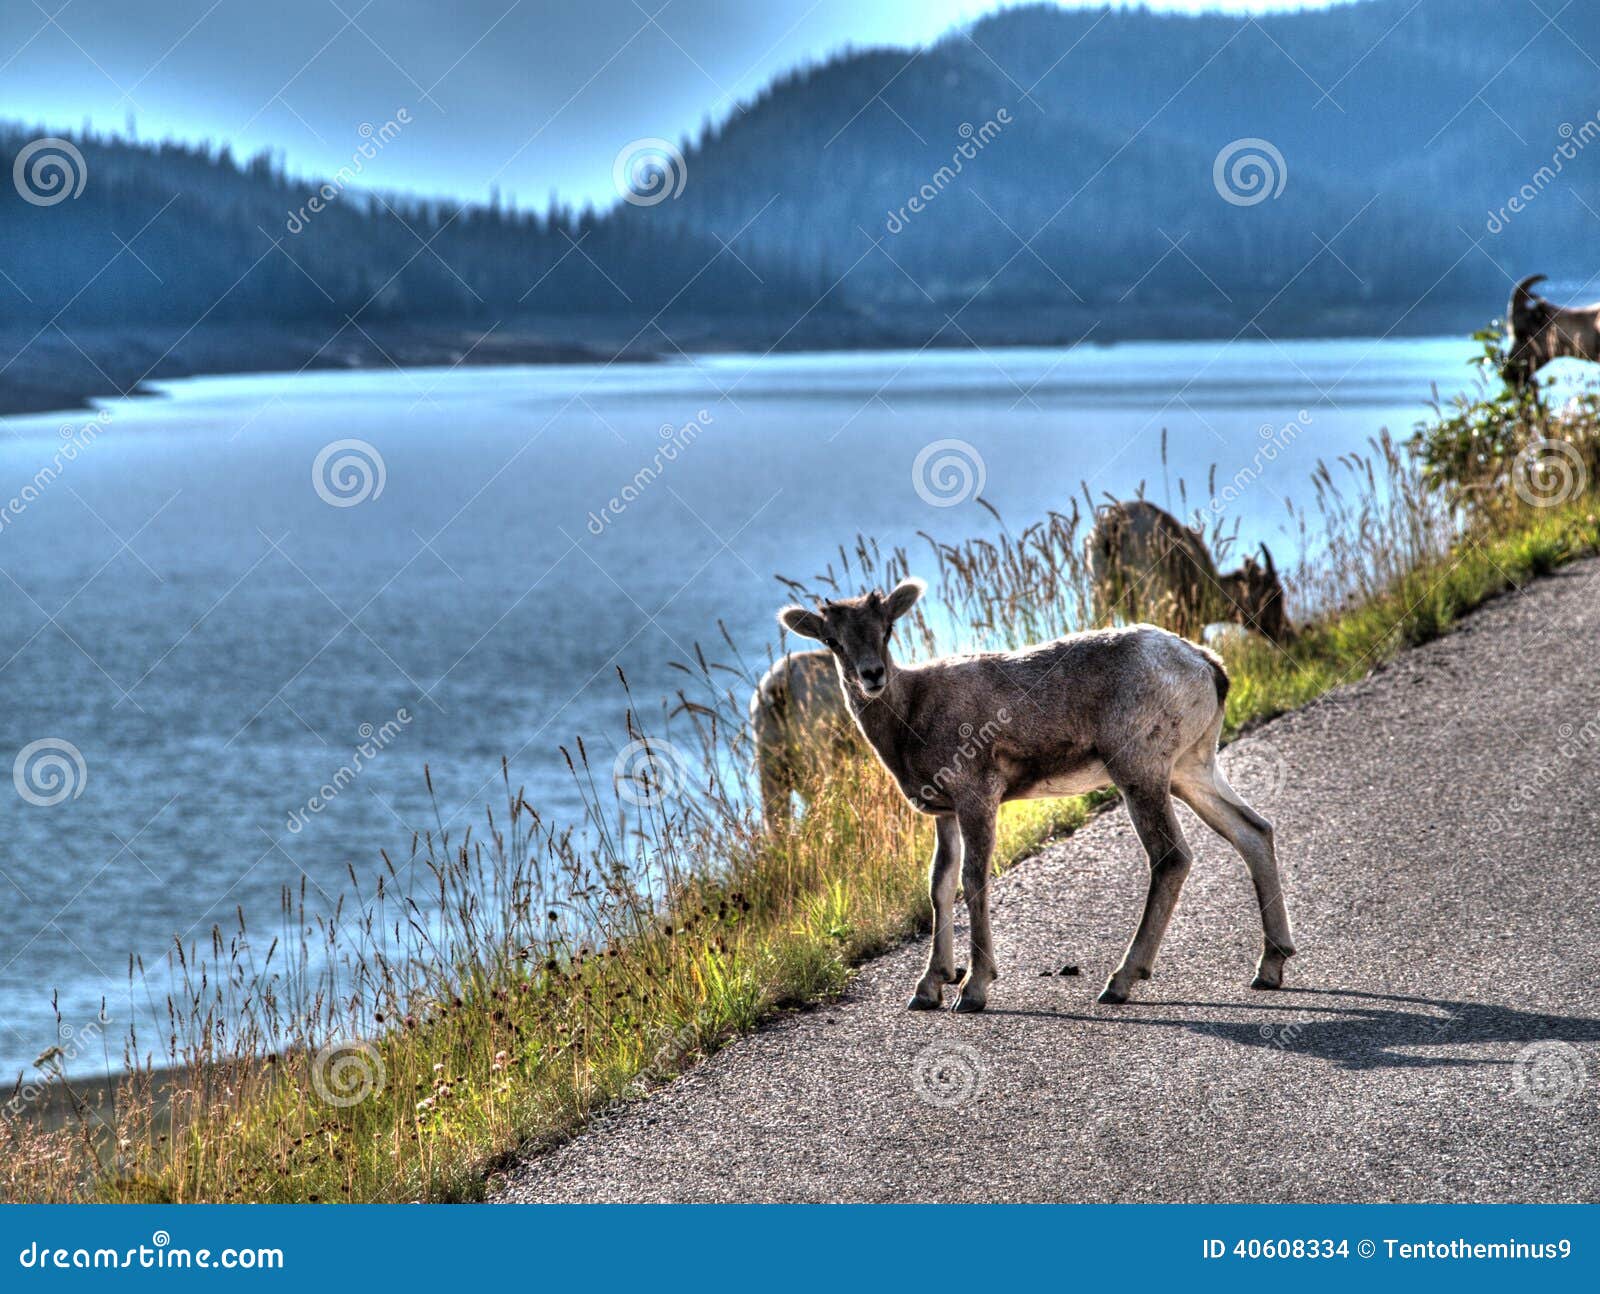 a goat on the side of a road in canana